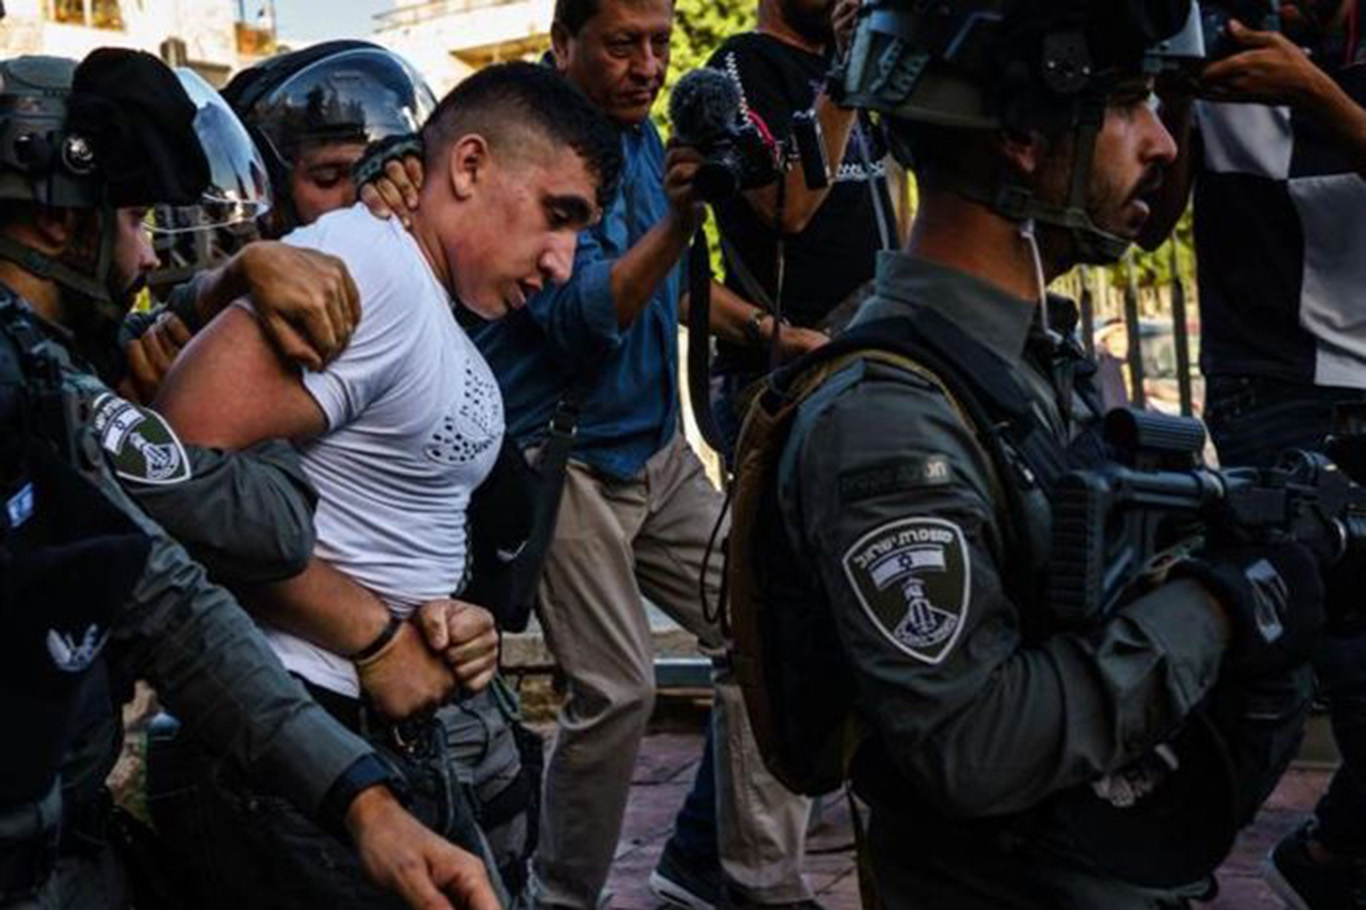 Zionist forces kidnap at least 9 Palestinians in West Bank